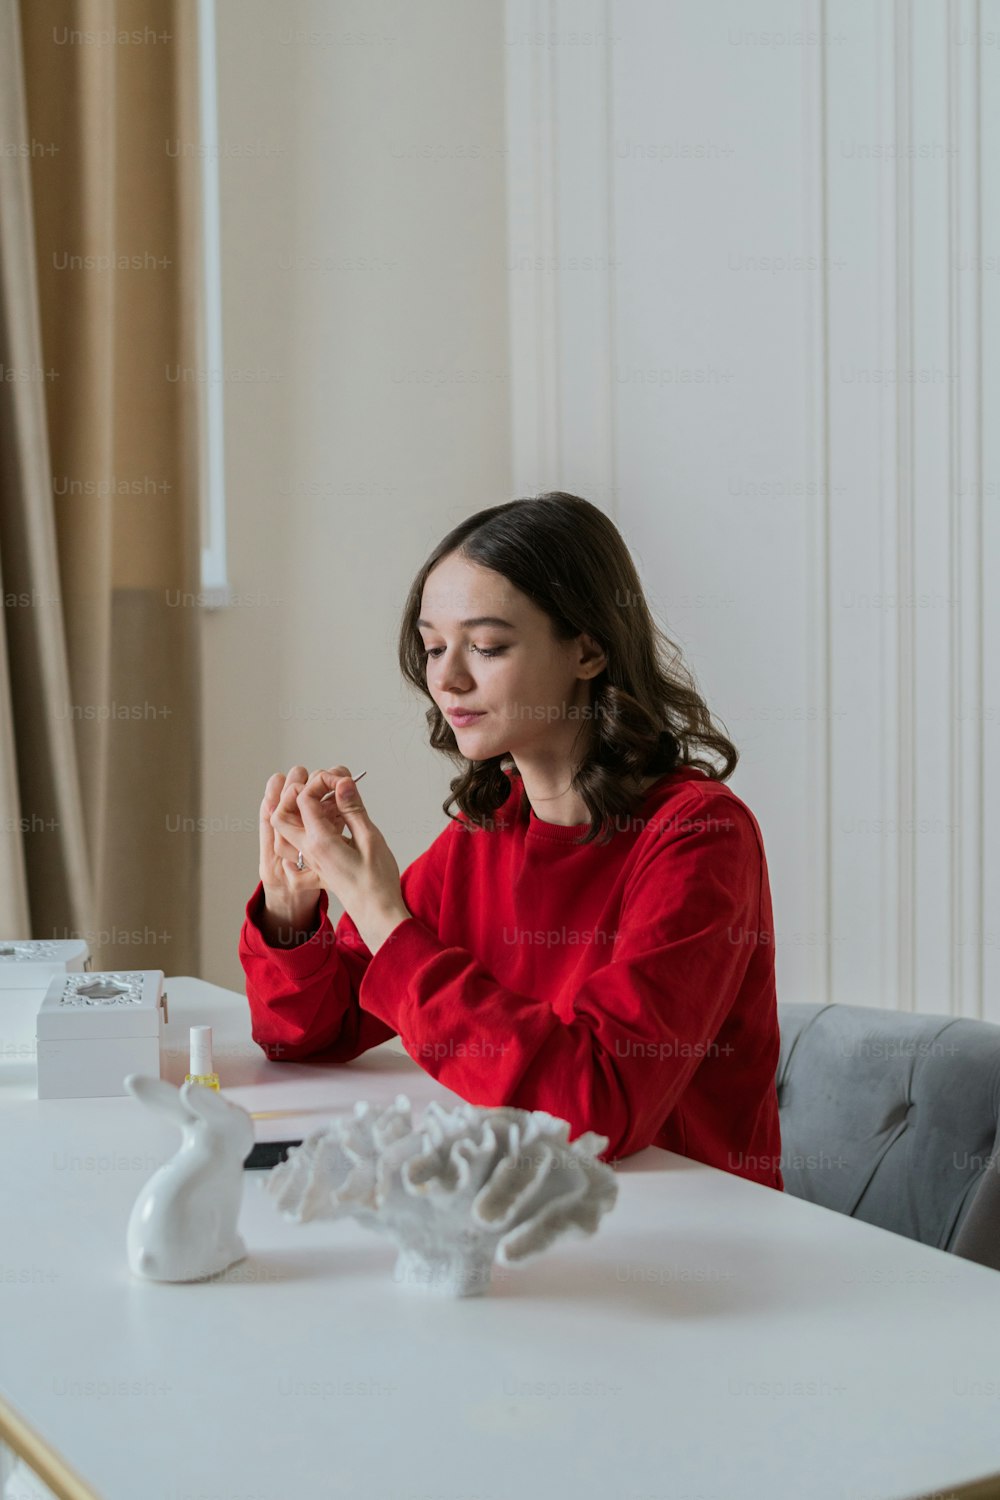 a woman sitting at a table praying